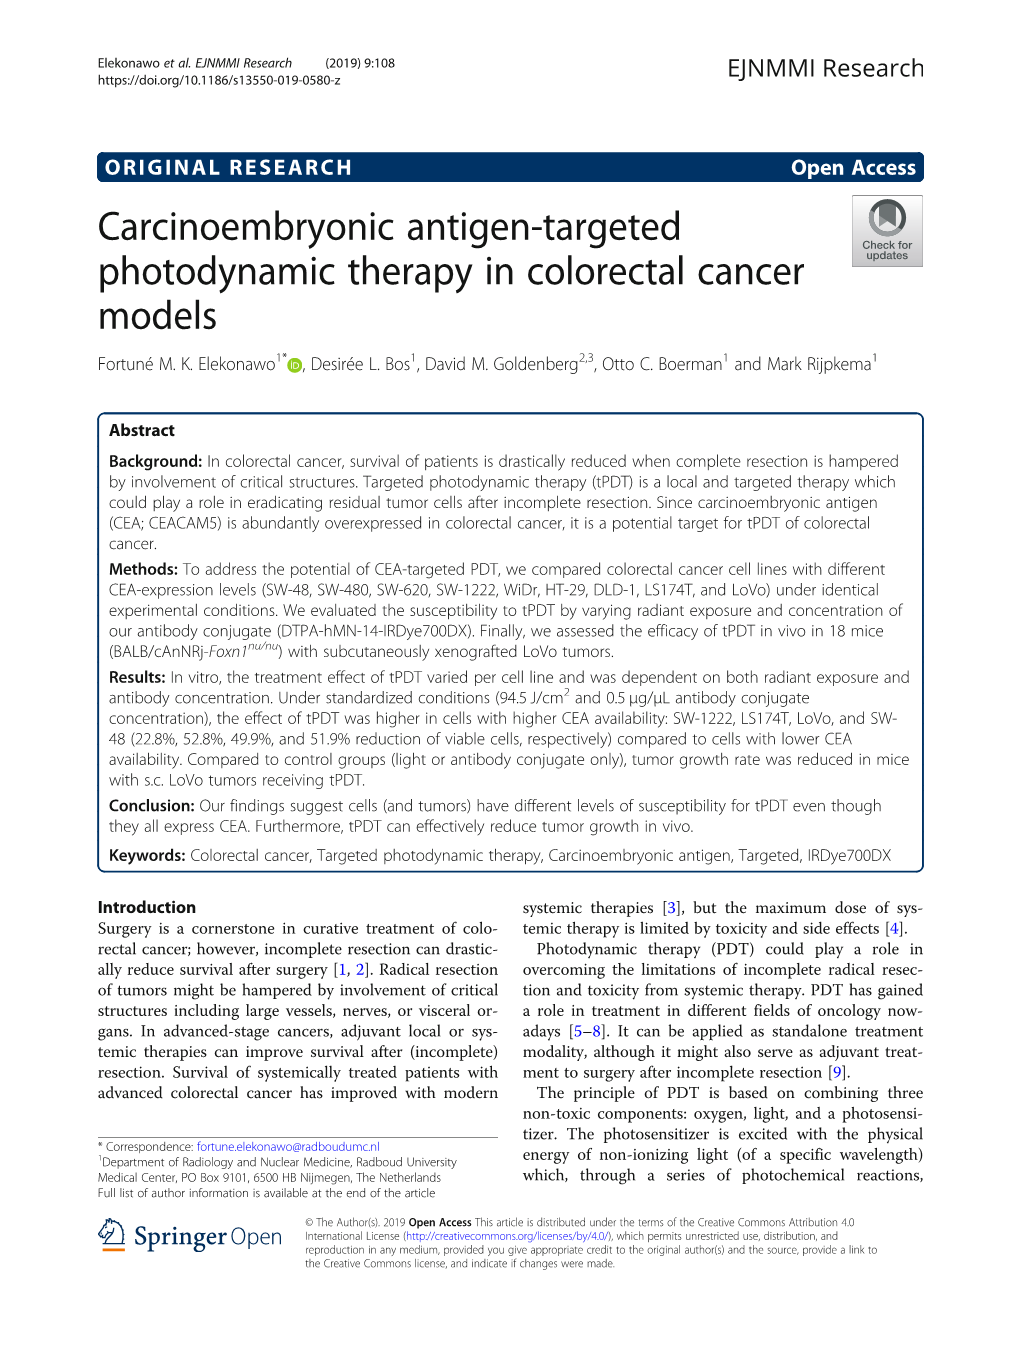 Carcinoembryonic Antigen-Targeted Photodynamic Therapy in Colorectal Cancer Models Fortuné M